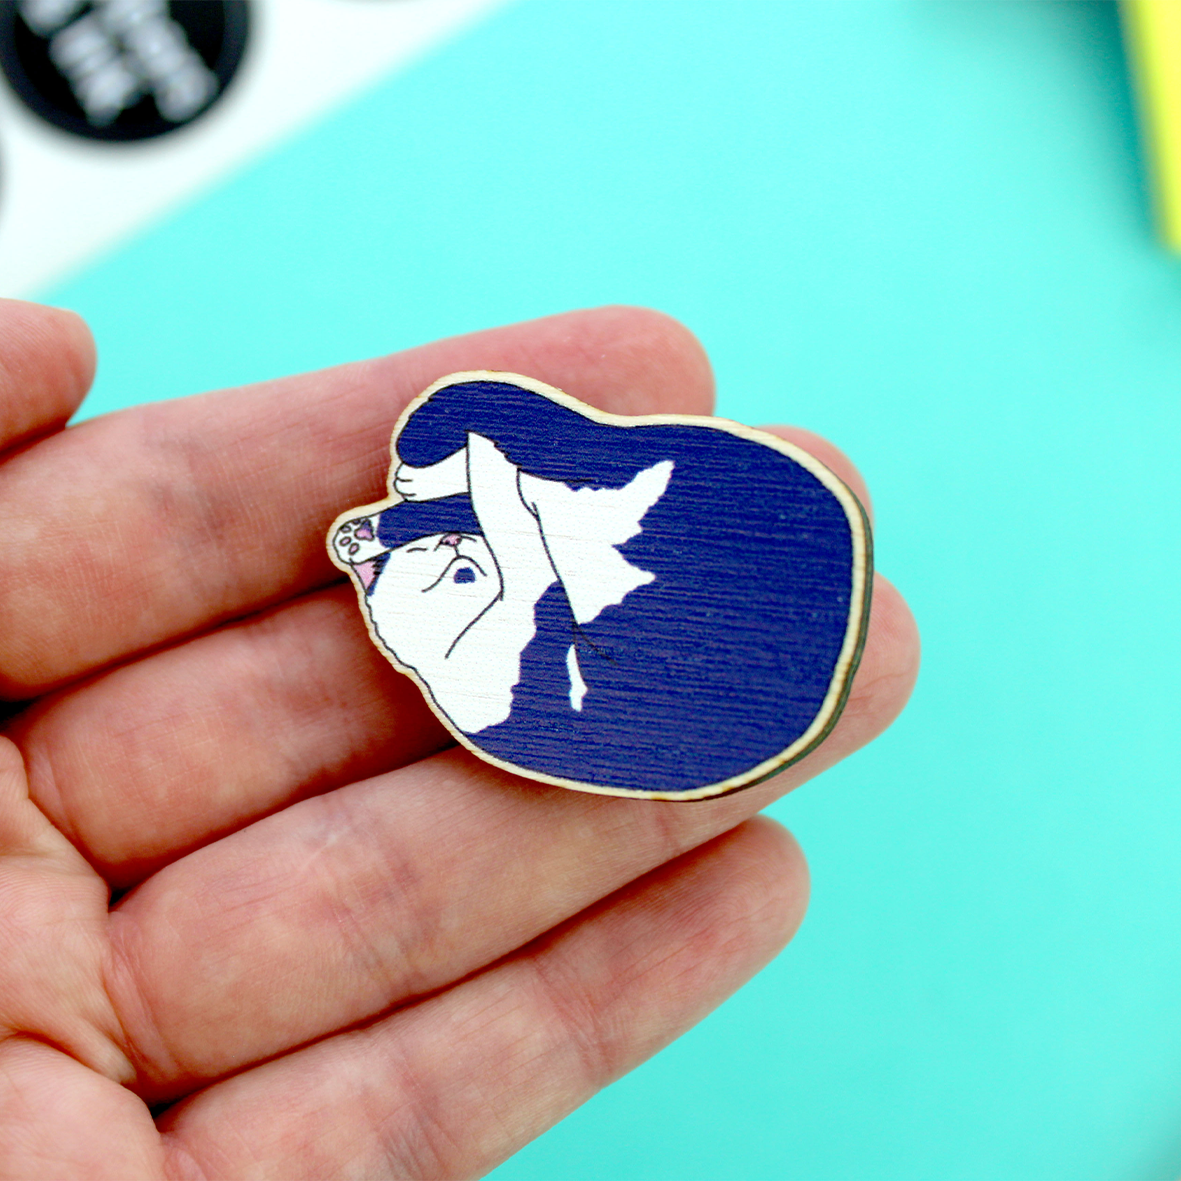 The wooden cat pin badge is photographed in an open hand as an indicator of size (41mm x 30mm approximately)